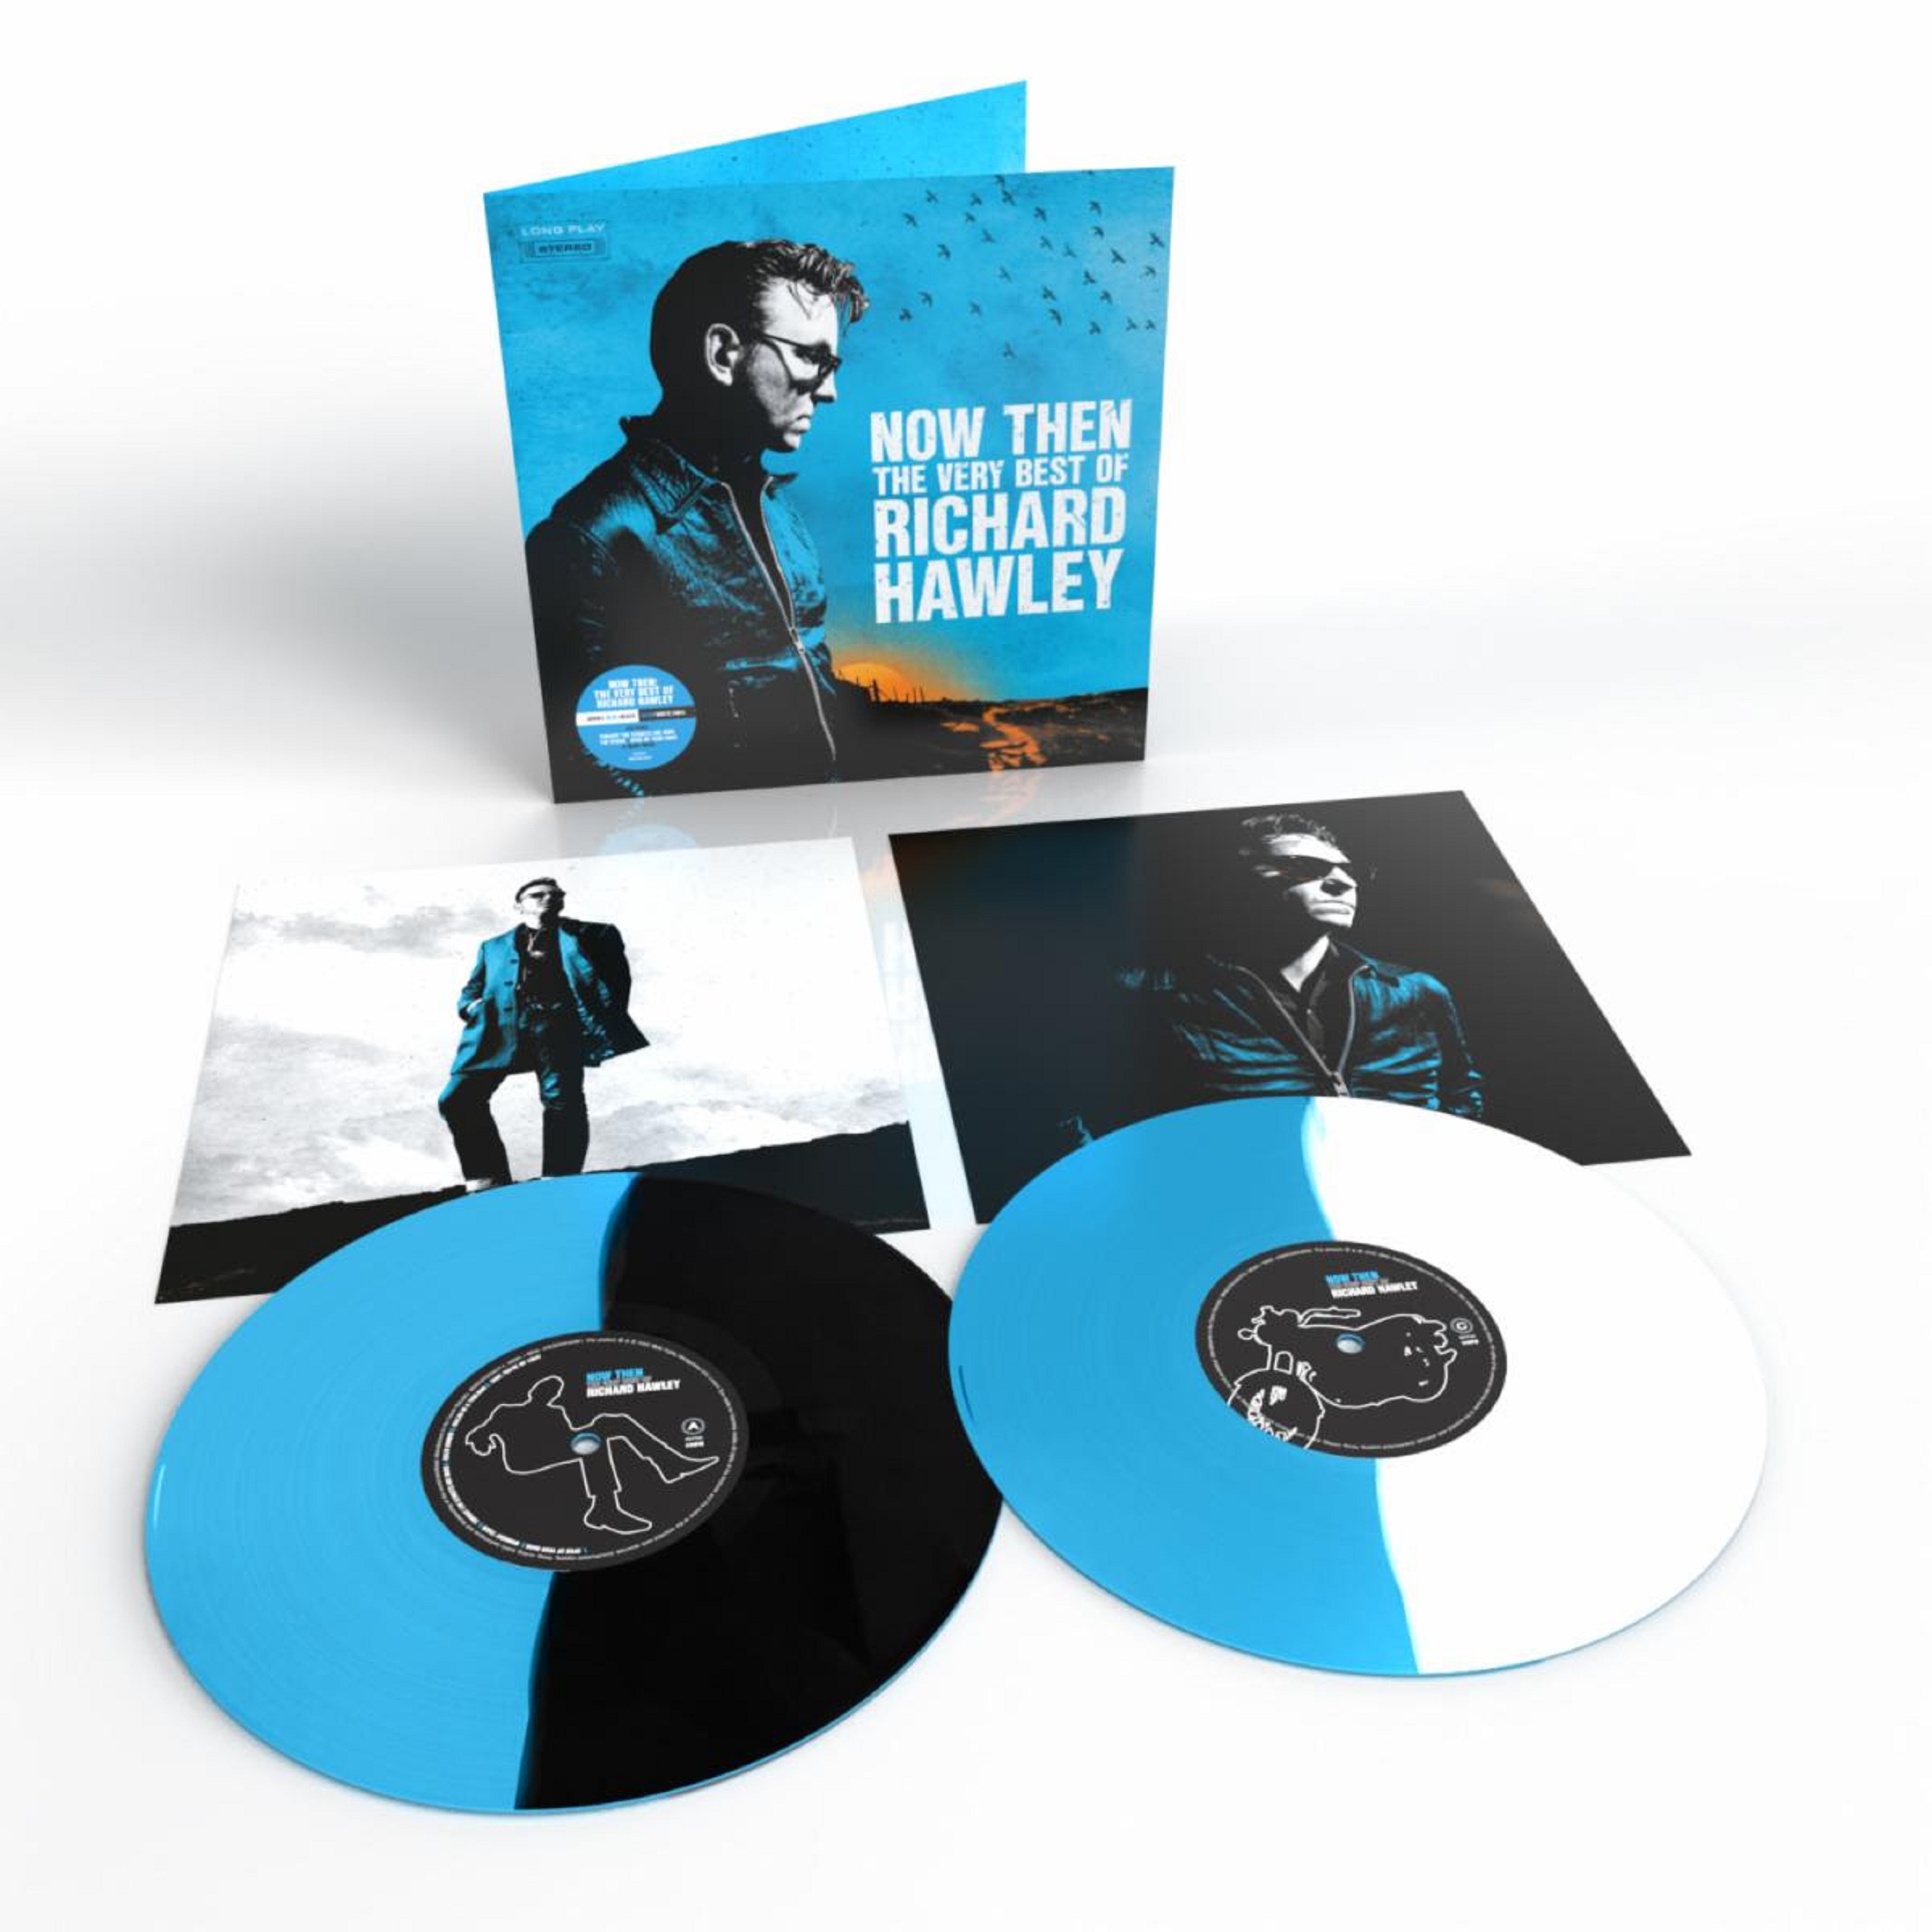 BMG announce first ever career spanning collection of Richard Hawley's music